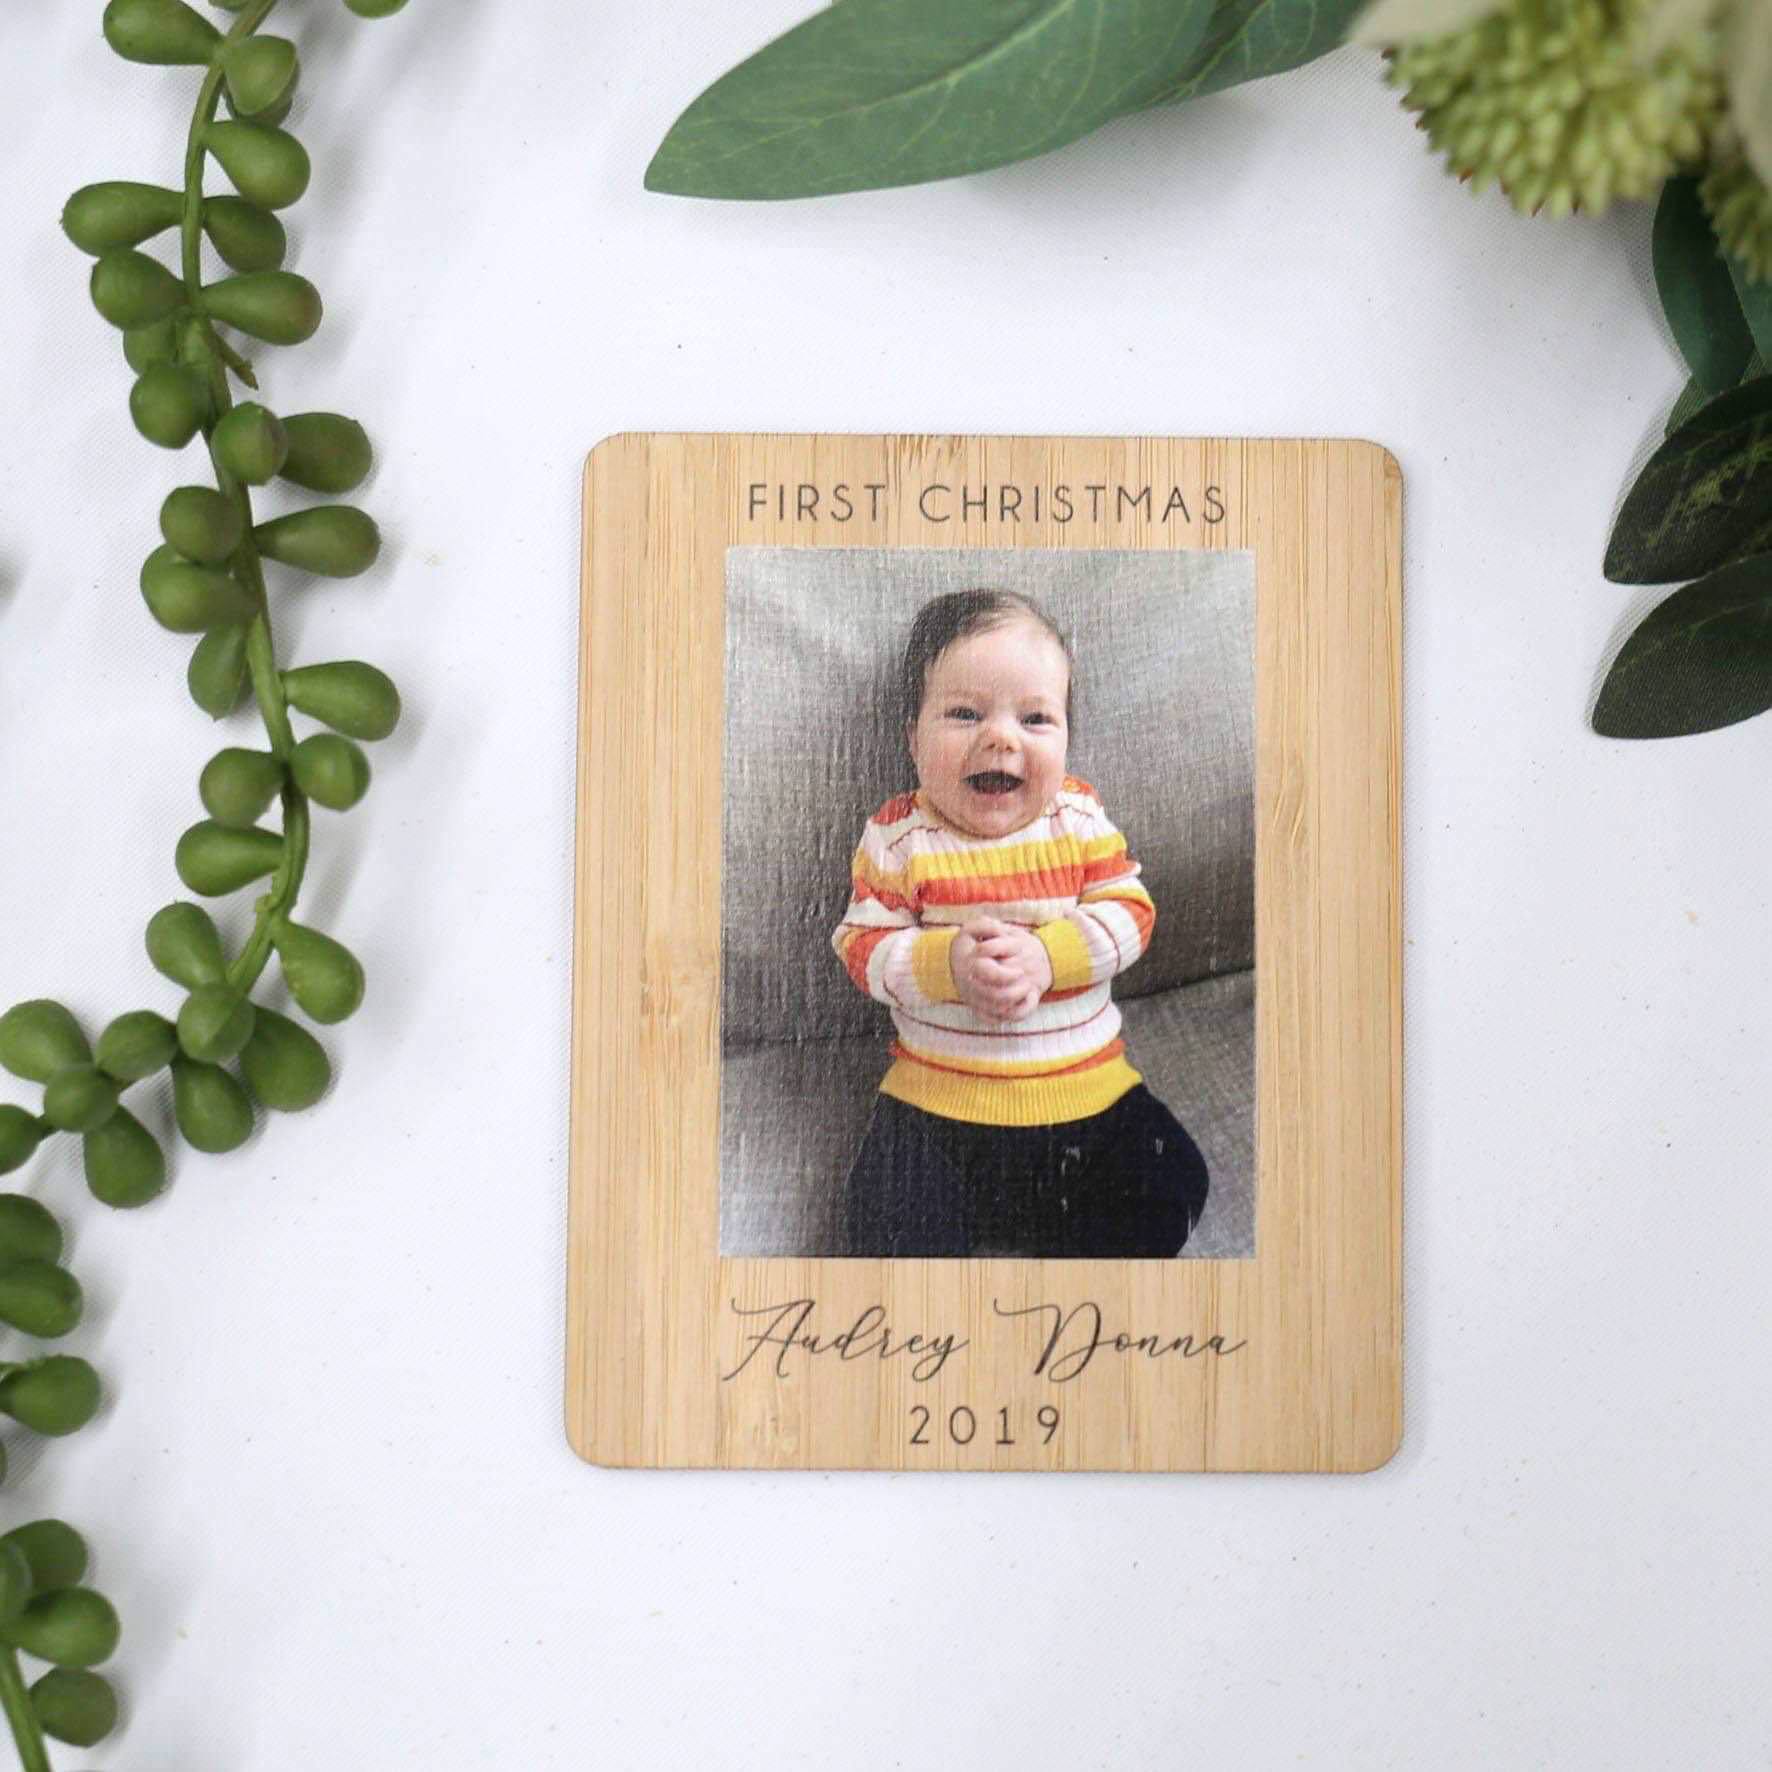 First Christmas Photo Magnet